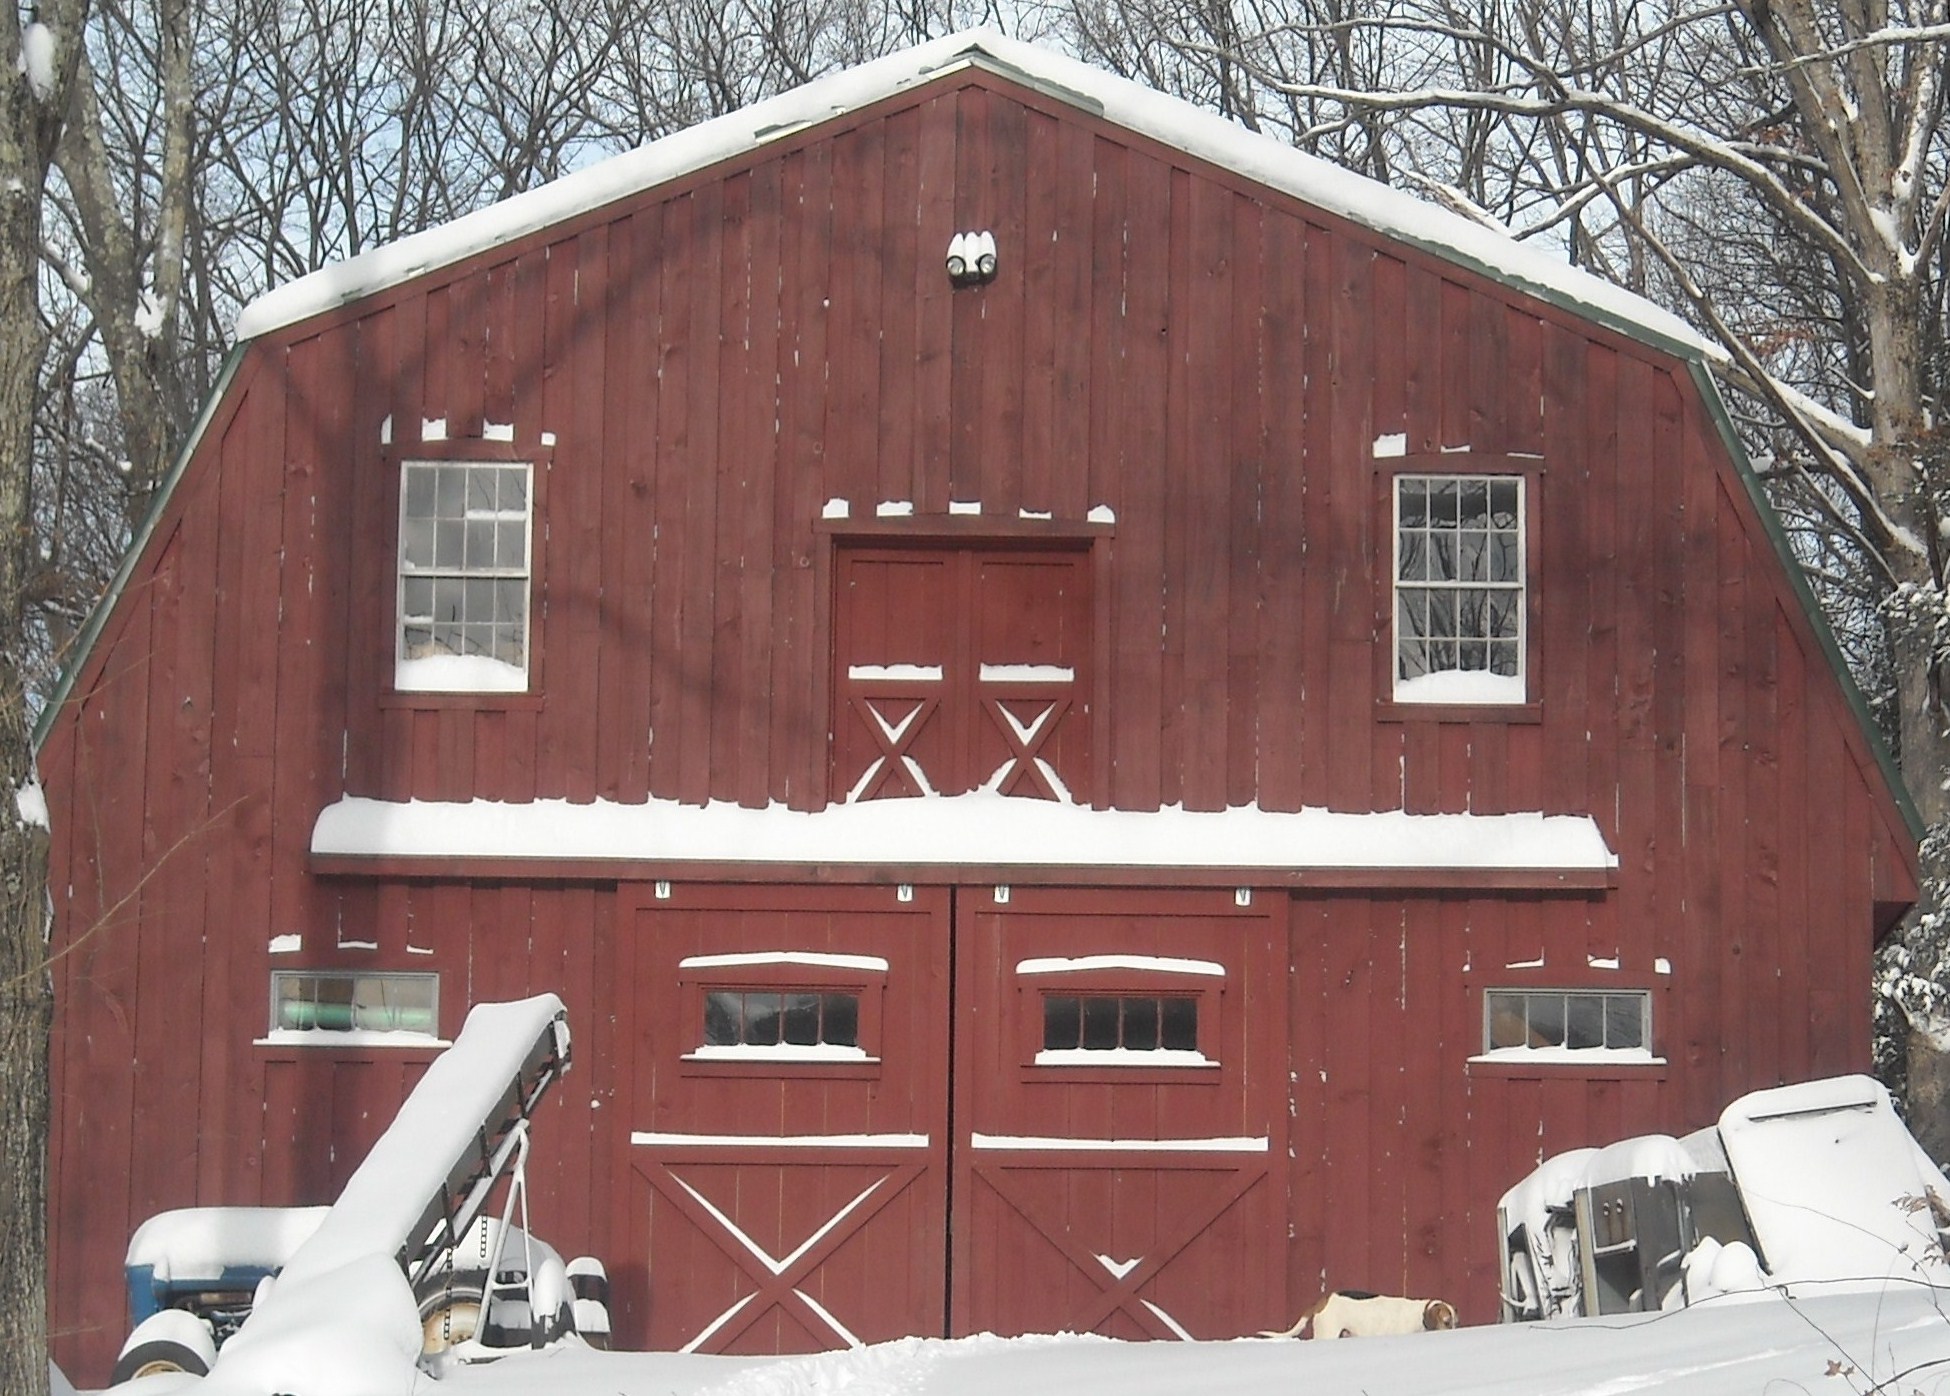 Blizzard Barn (user submitted)